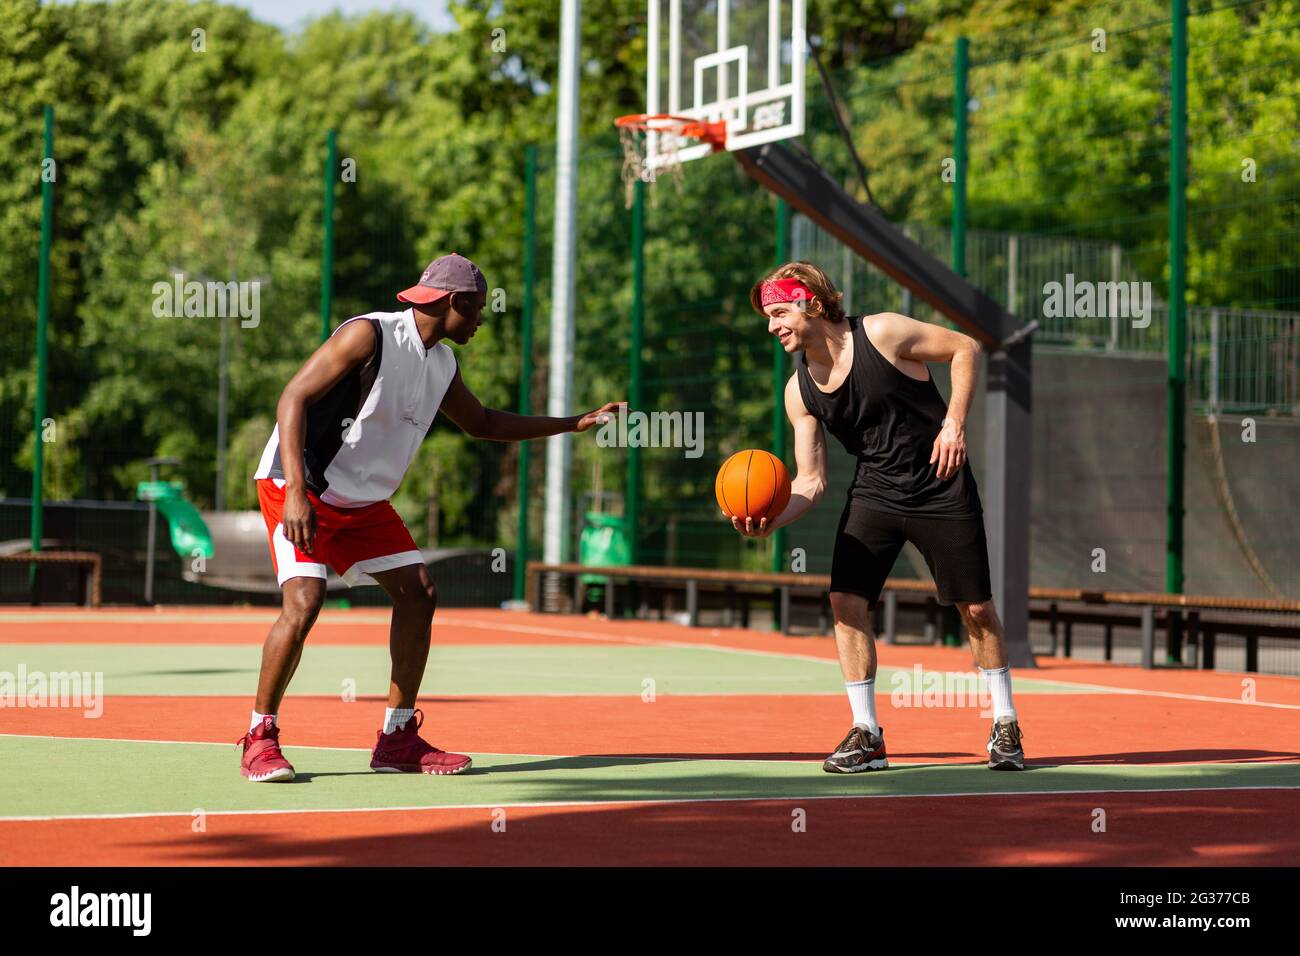 Professional basketball players having friendly match at outdoor arena Stock Photo